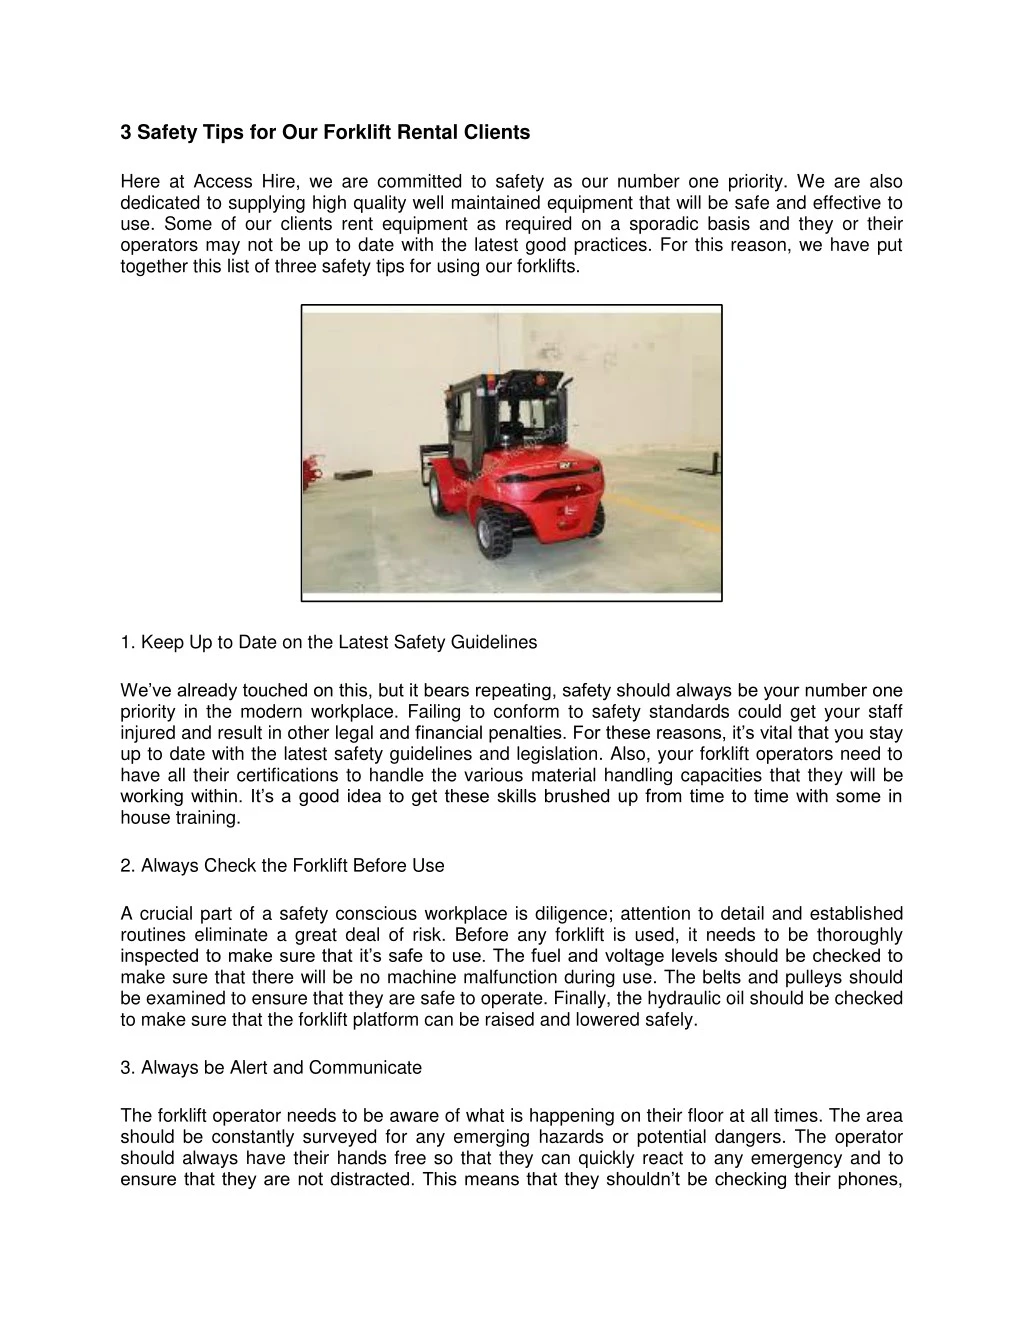 3 safety tips for our forklift rental clients